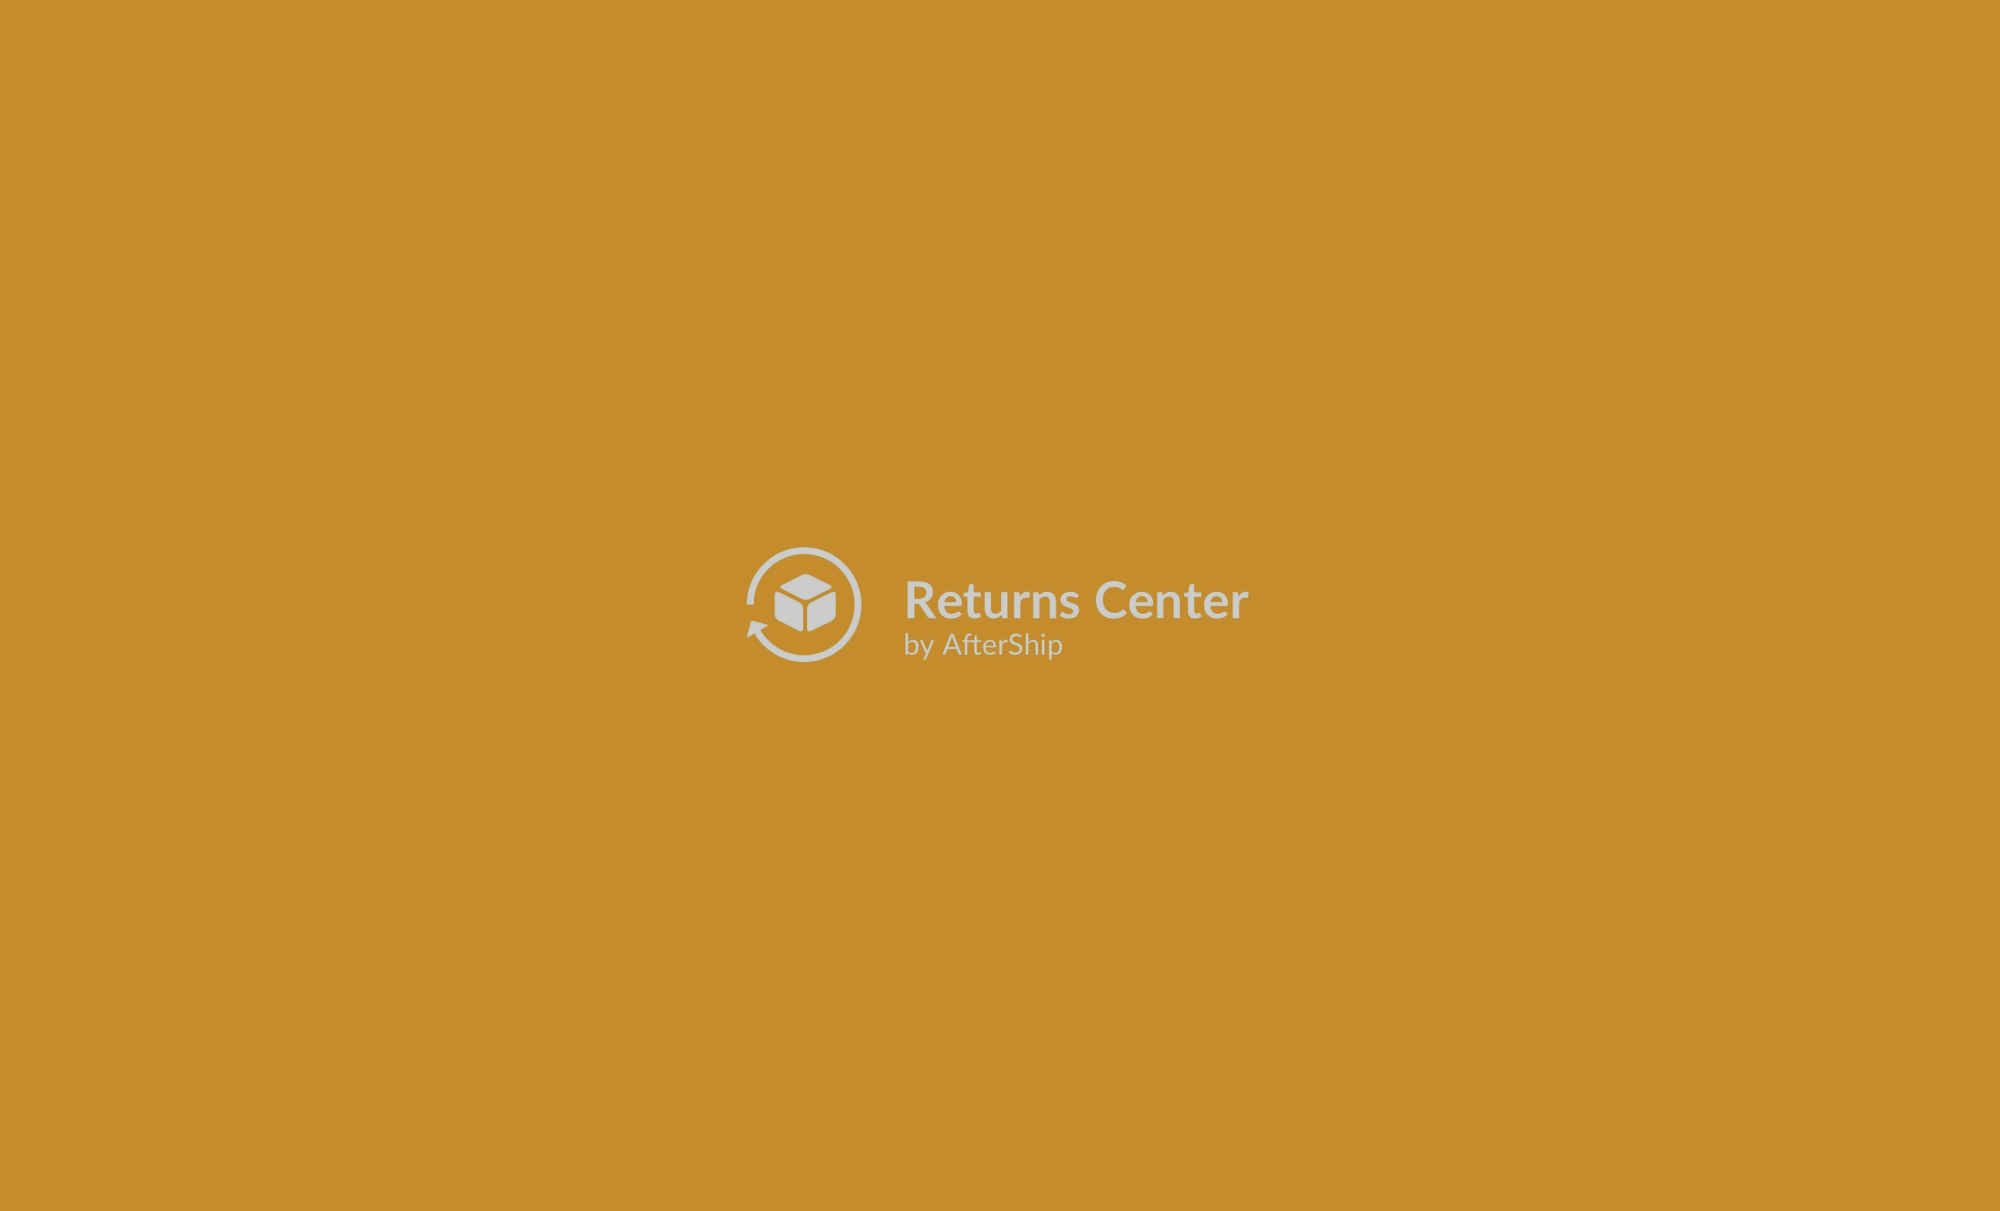 AfterShip launches new product - Returns Center